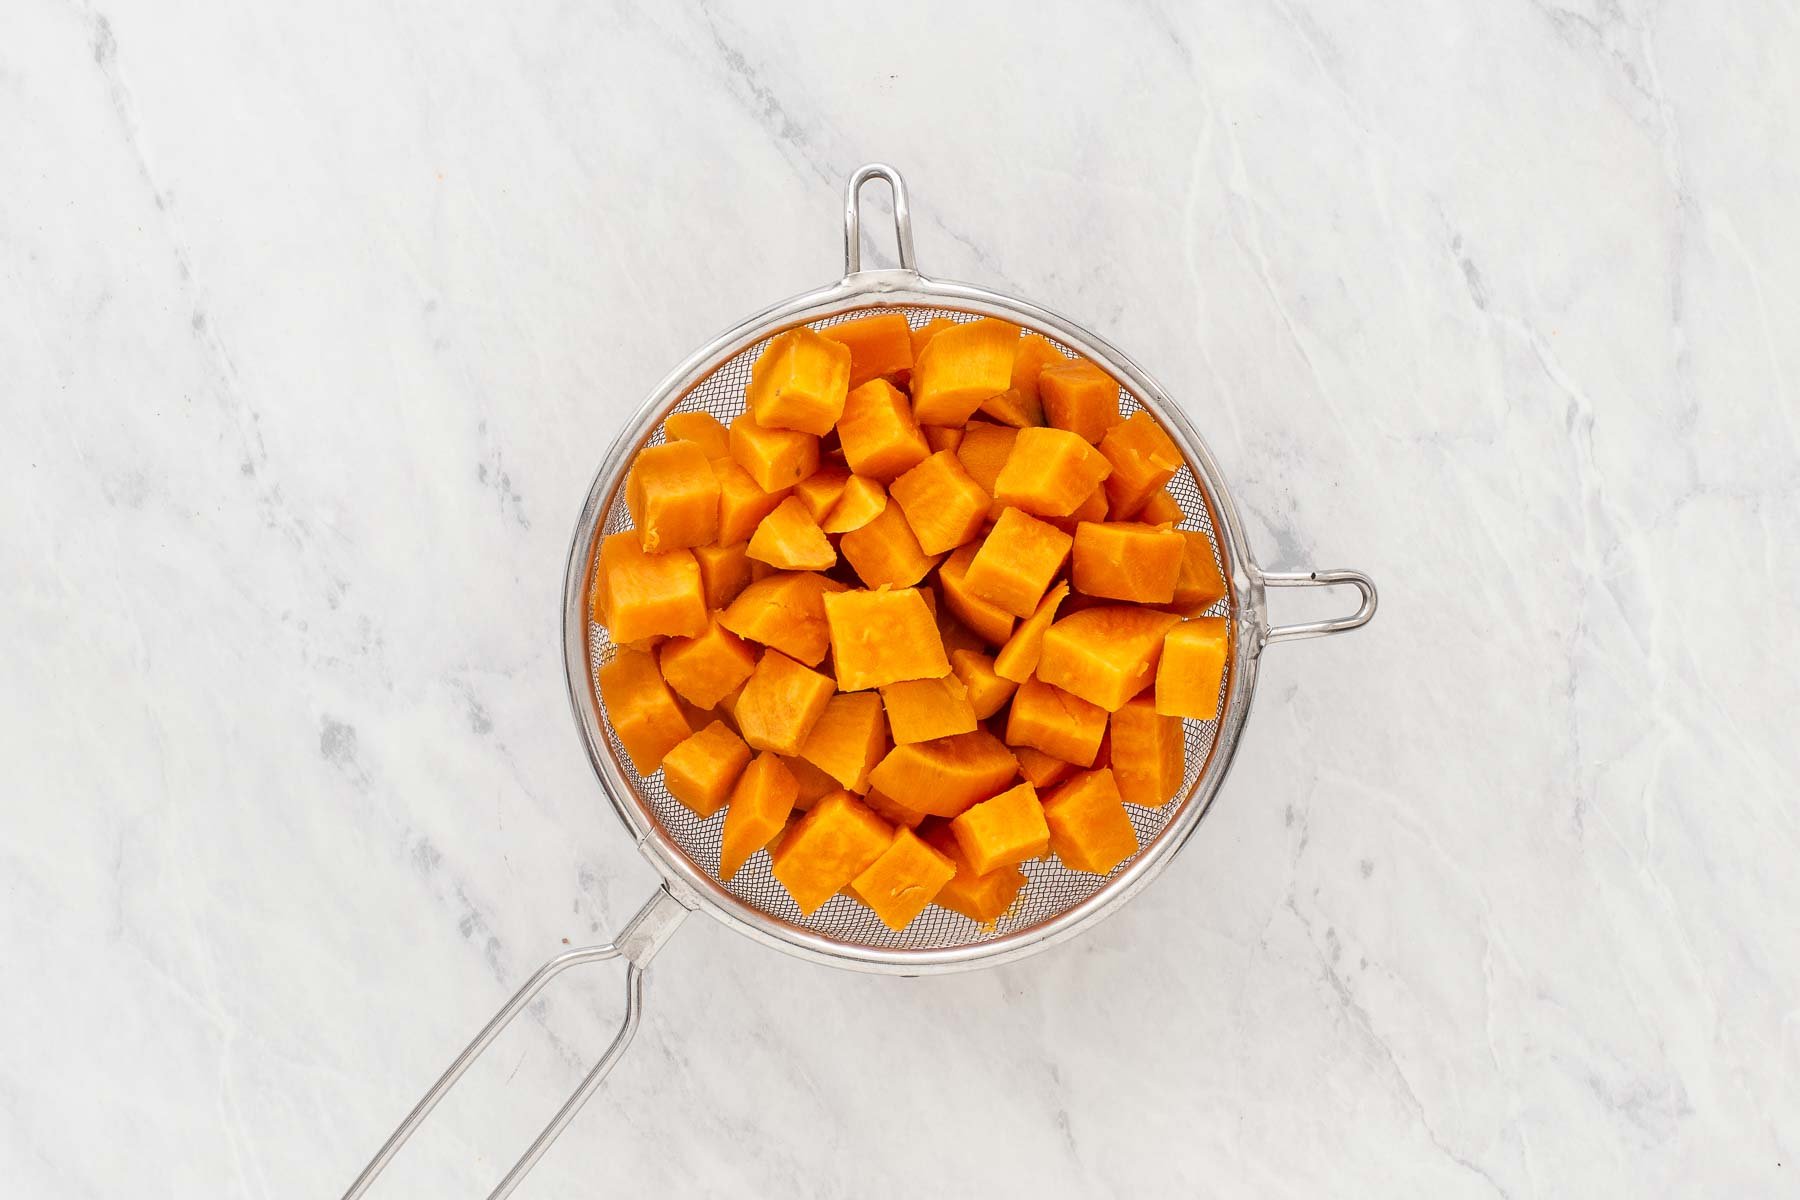 Cooked sweet potato draining in a colander on marble counter top.